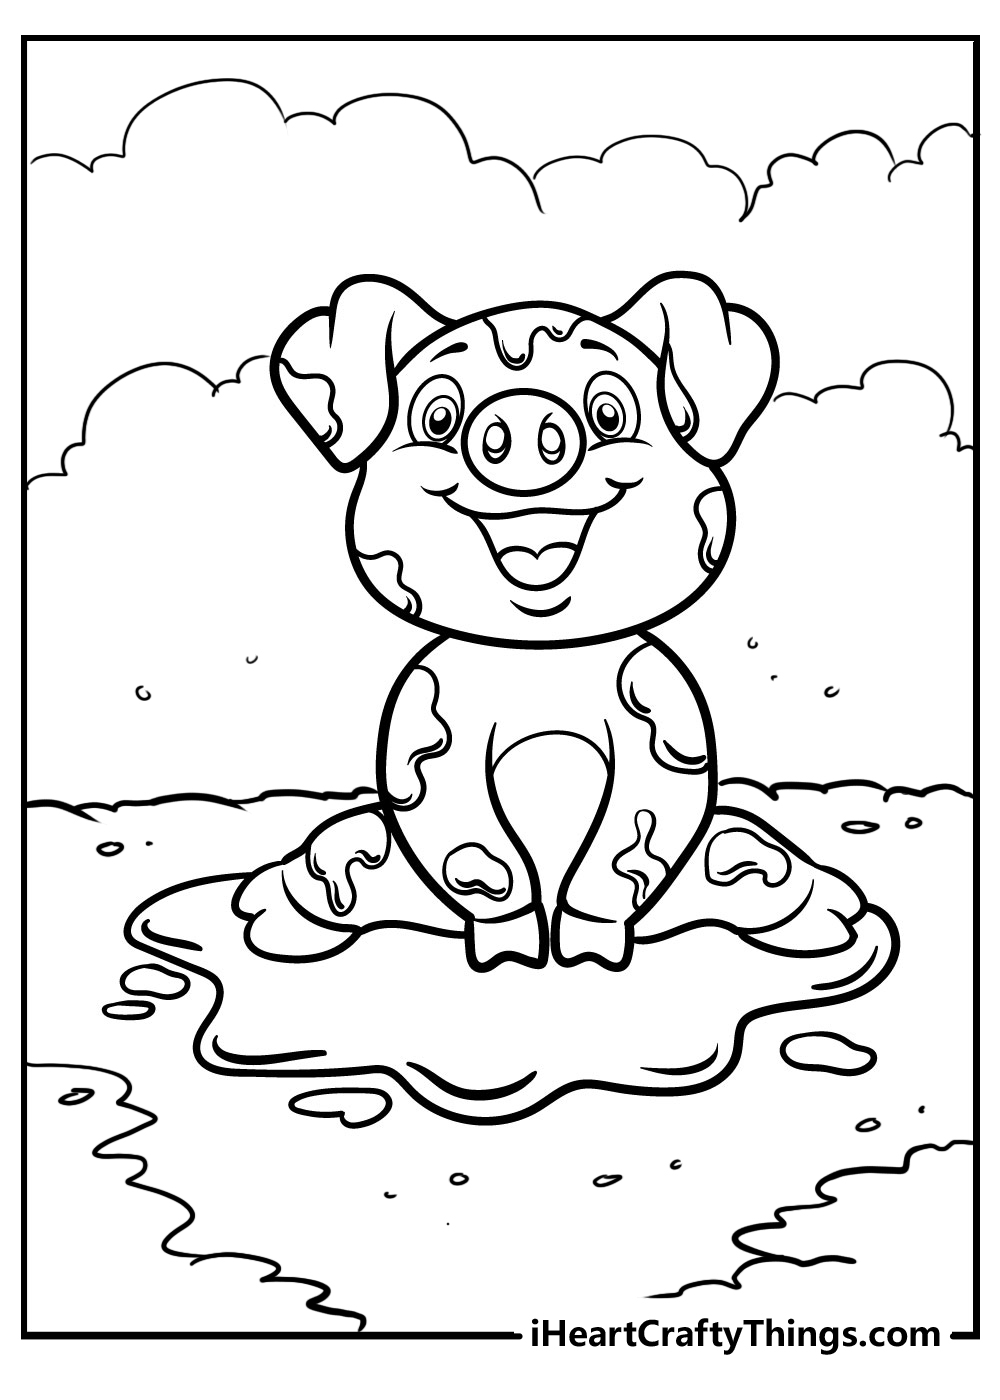 Disney Pig Coloring Pages